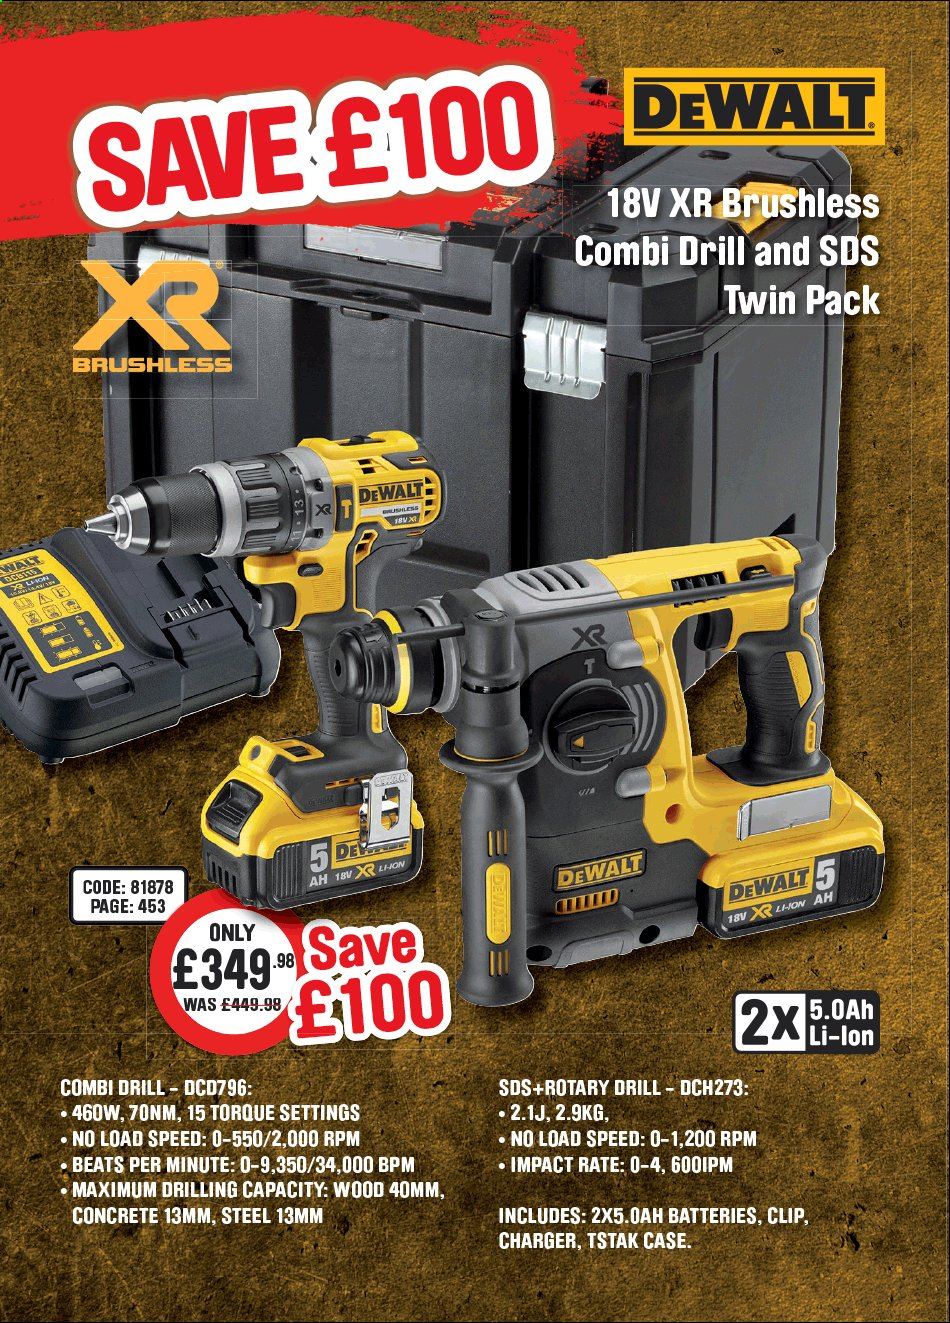 Toolstation offer . Page 446.